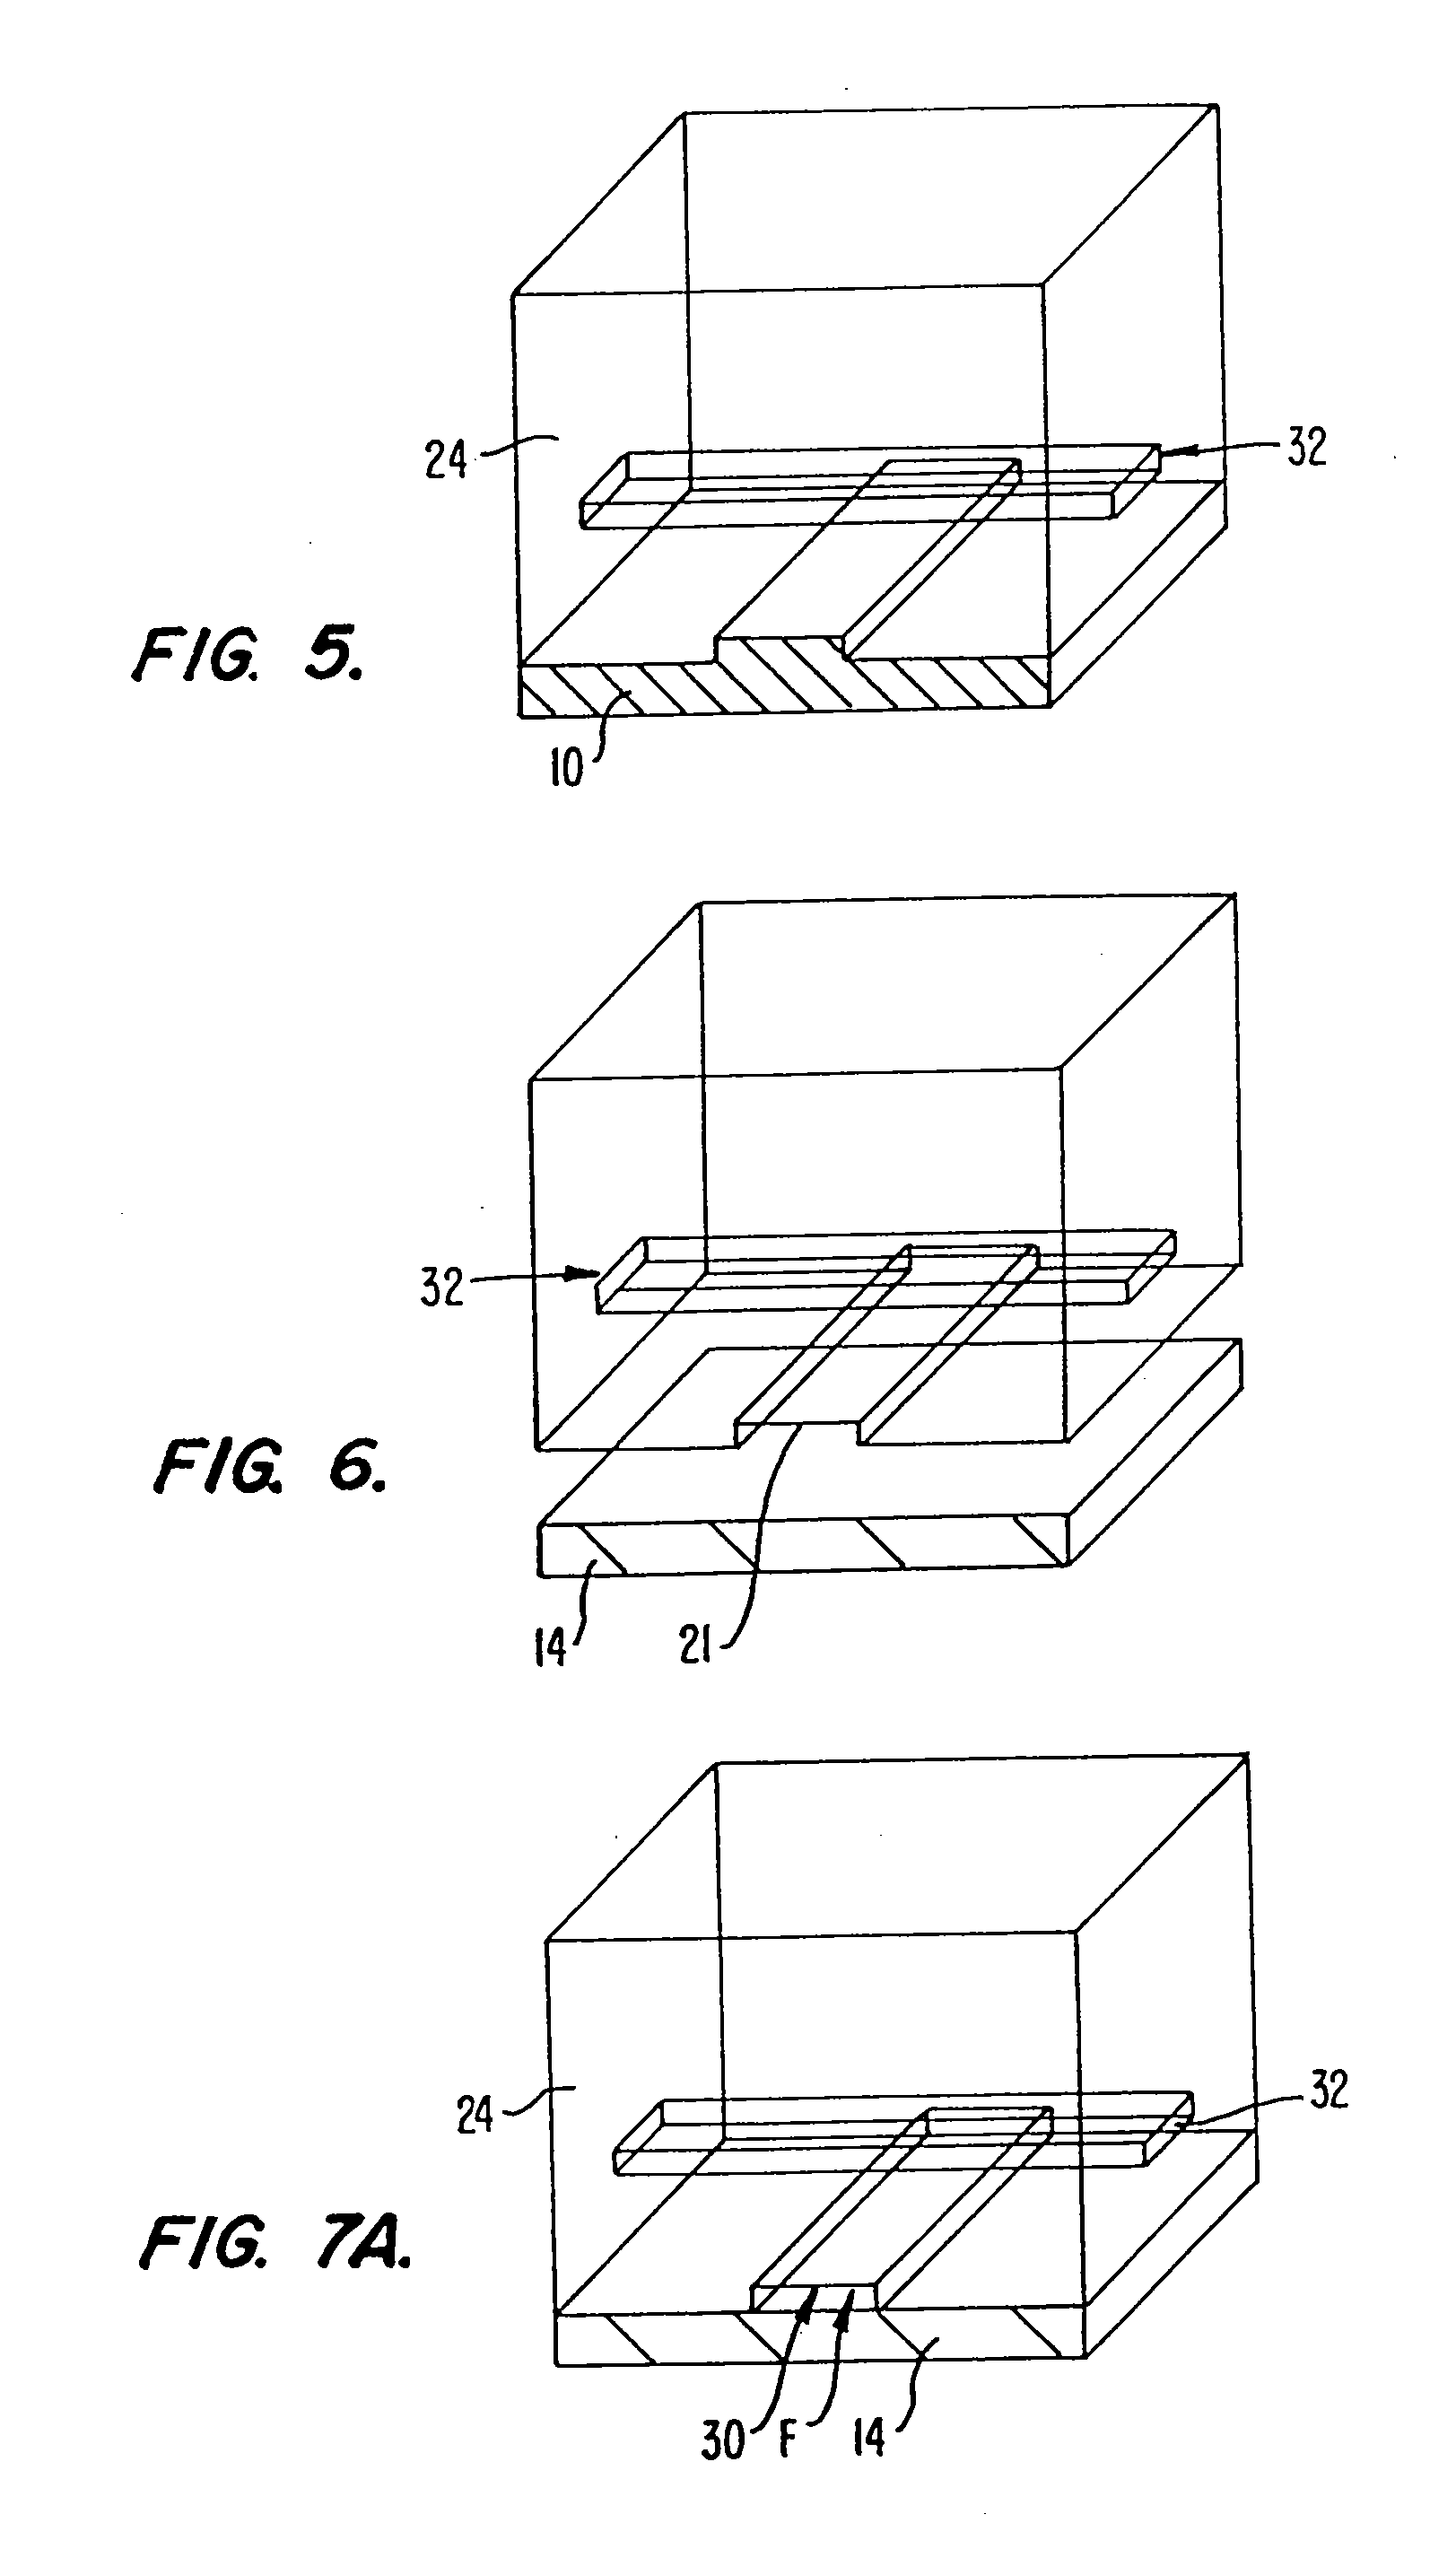 Microfabricated elastomeric valve and pump systems